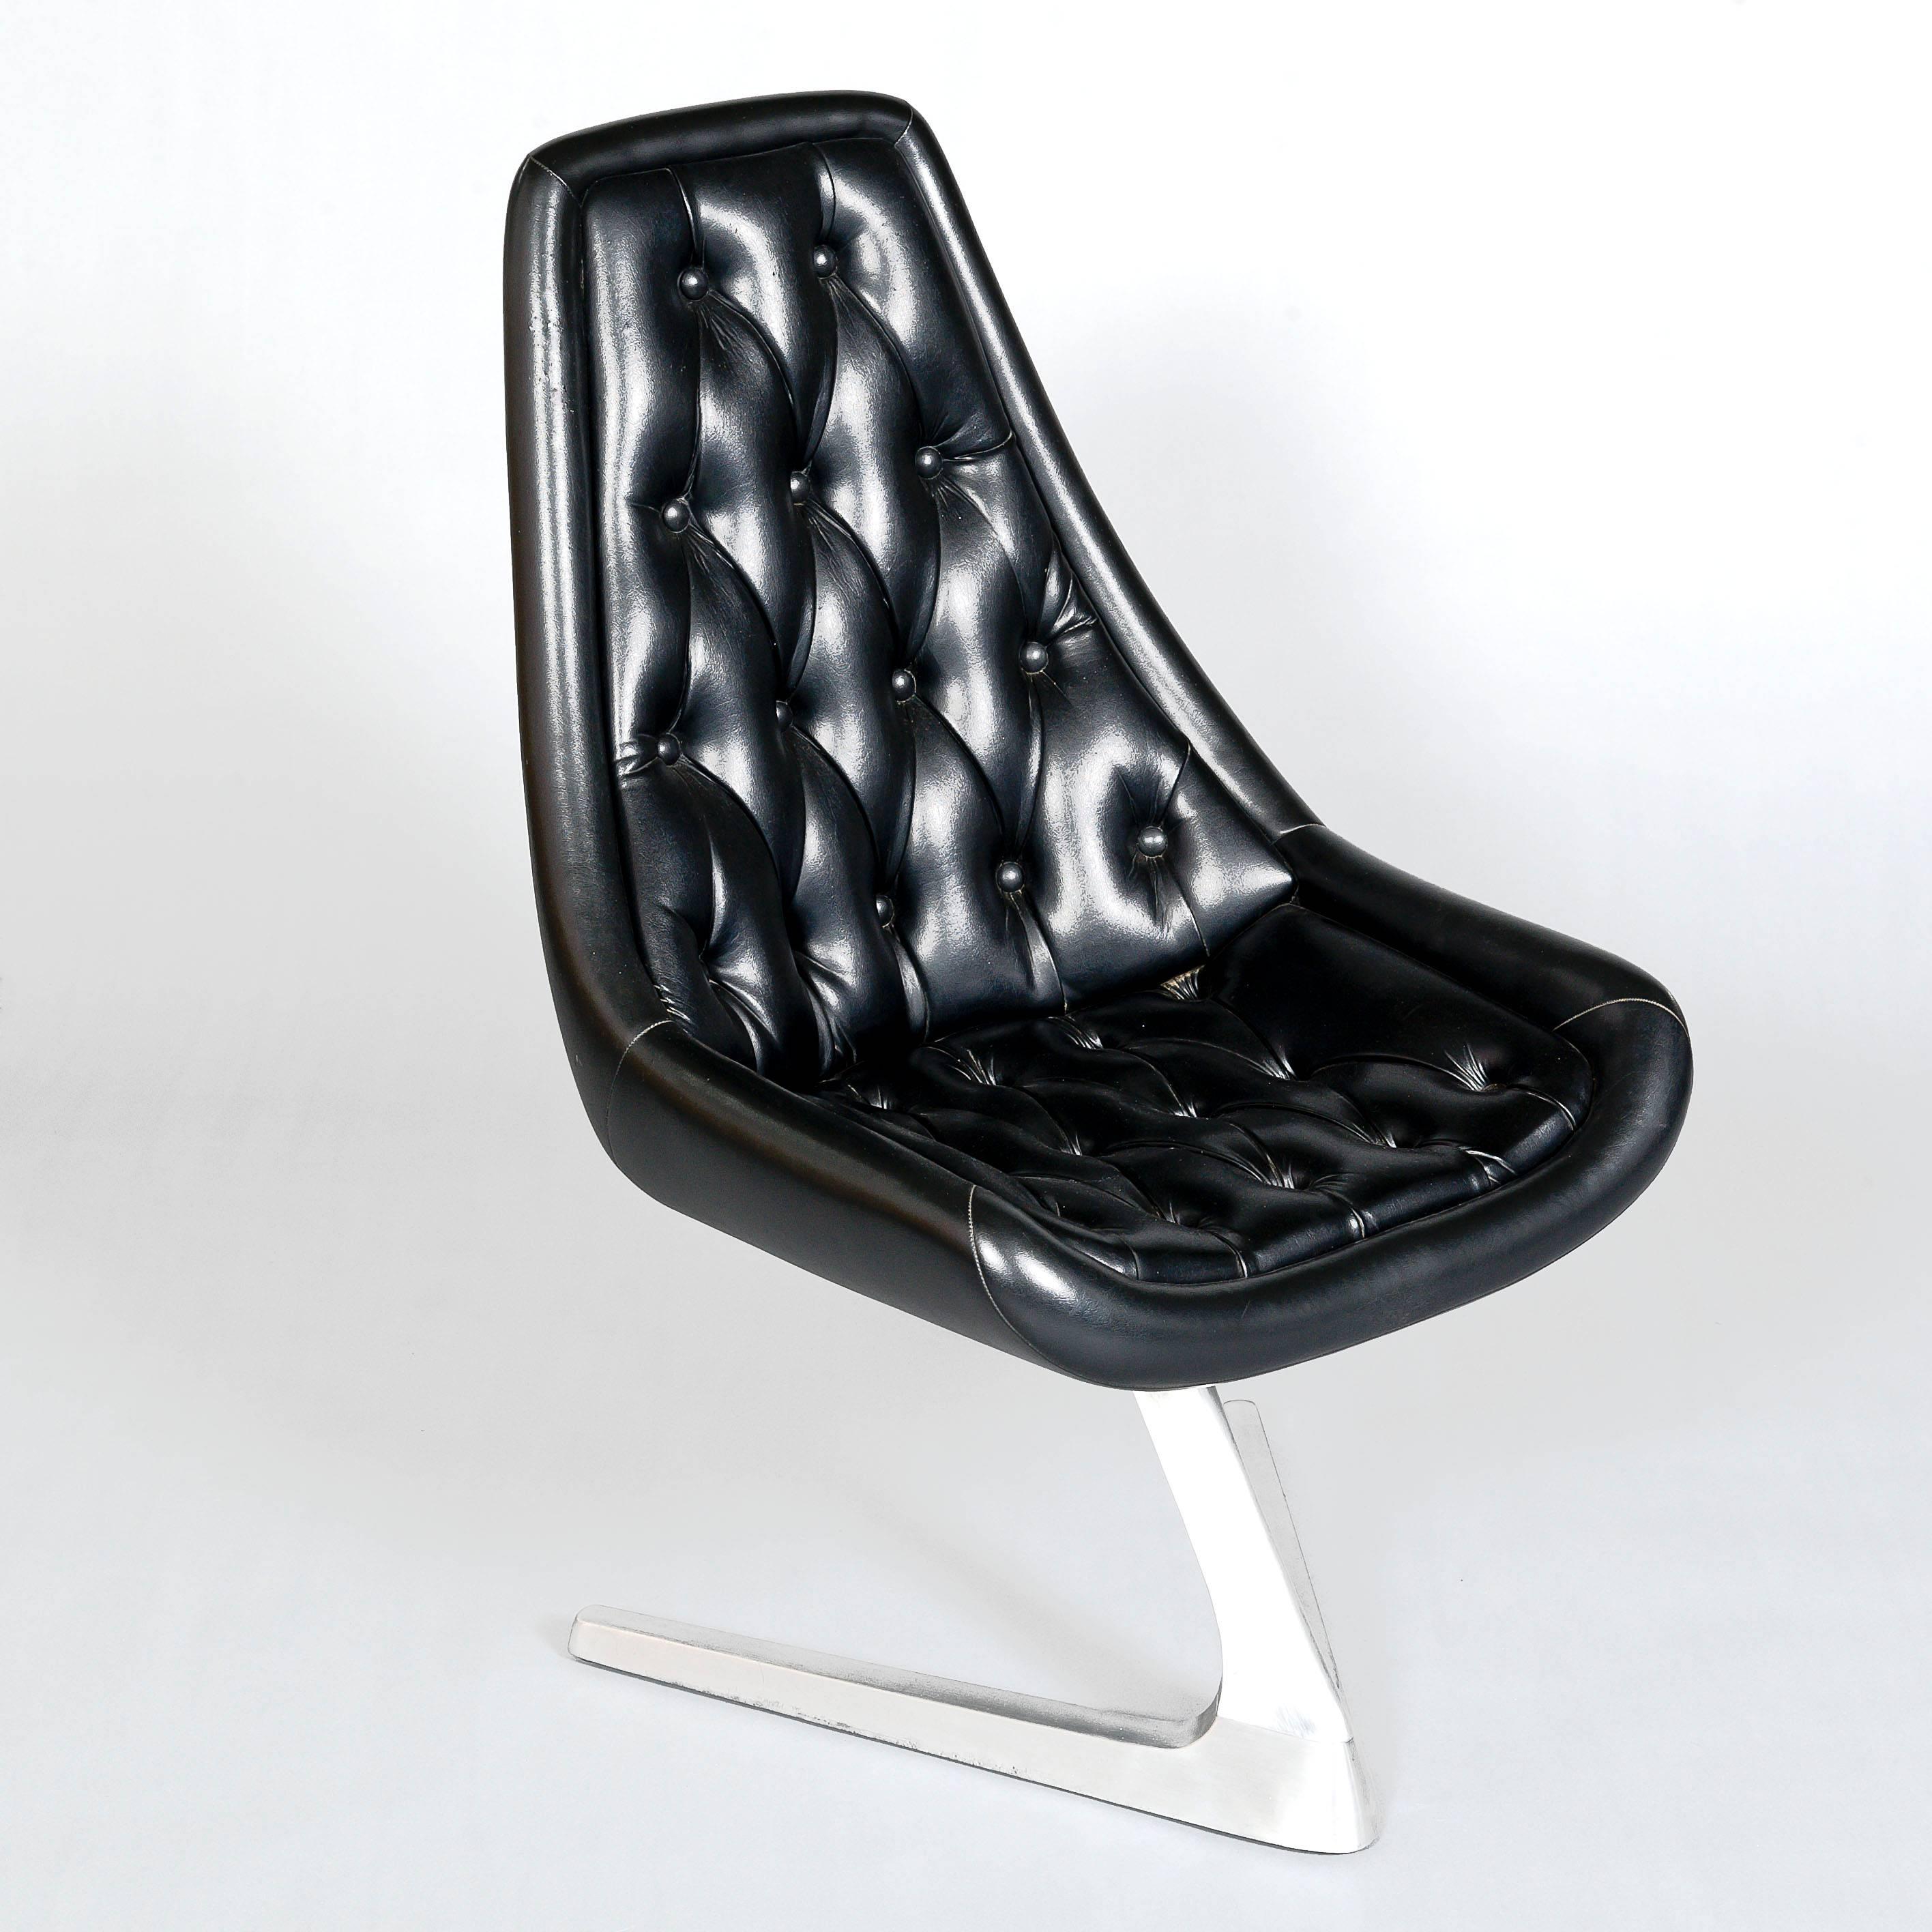 This model of Chromcraft chair featured in the original Star Trek series. Recently reupholstered in soft black leather we have seven chairs available. We also have four Sculpta chairs in vinyl upholstery (photos available on request).